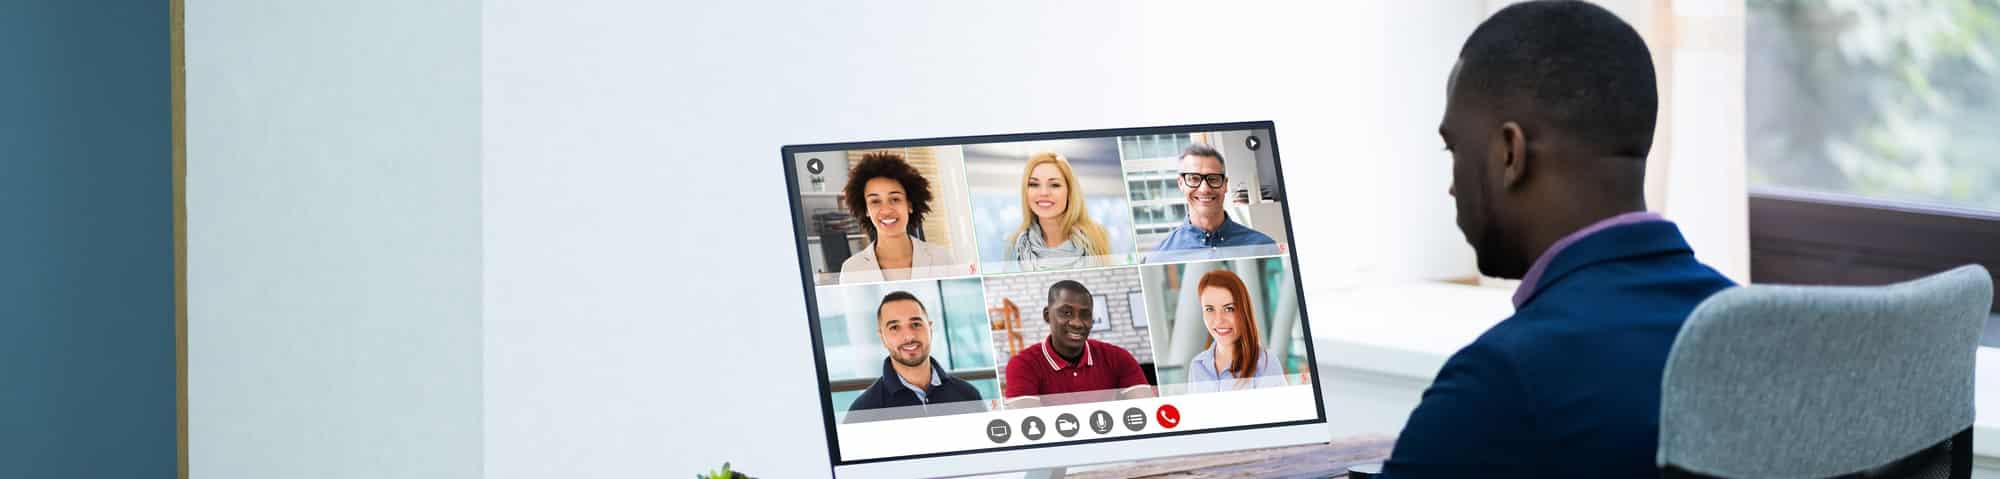 How To Lead Successful Virtual Meetings: 5 Guidelines